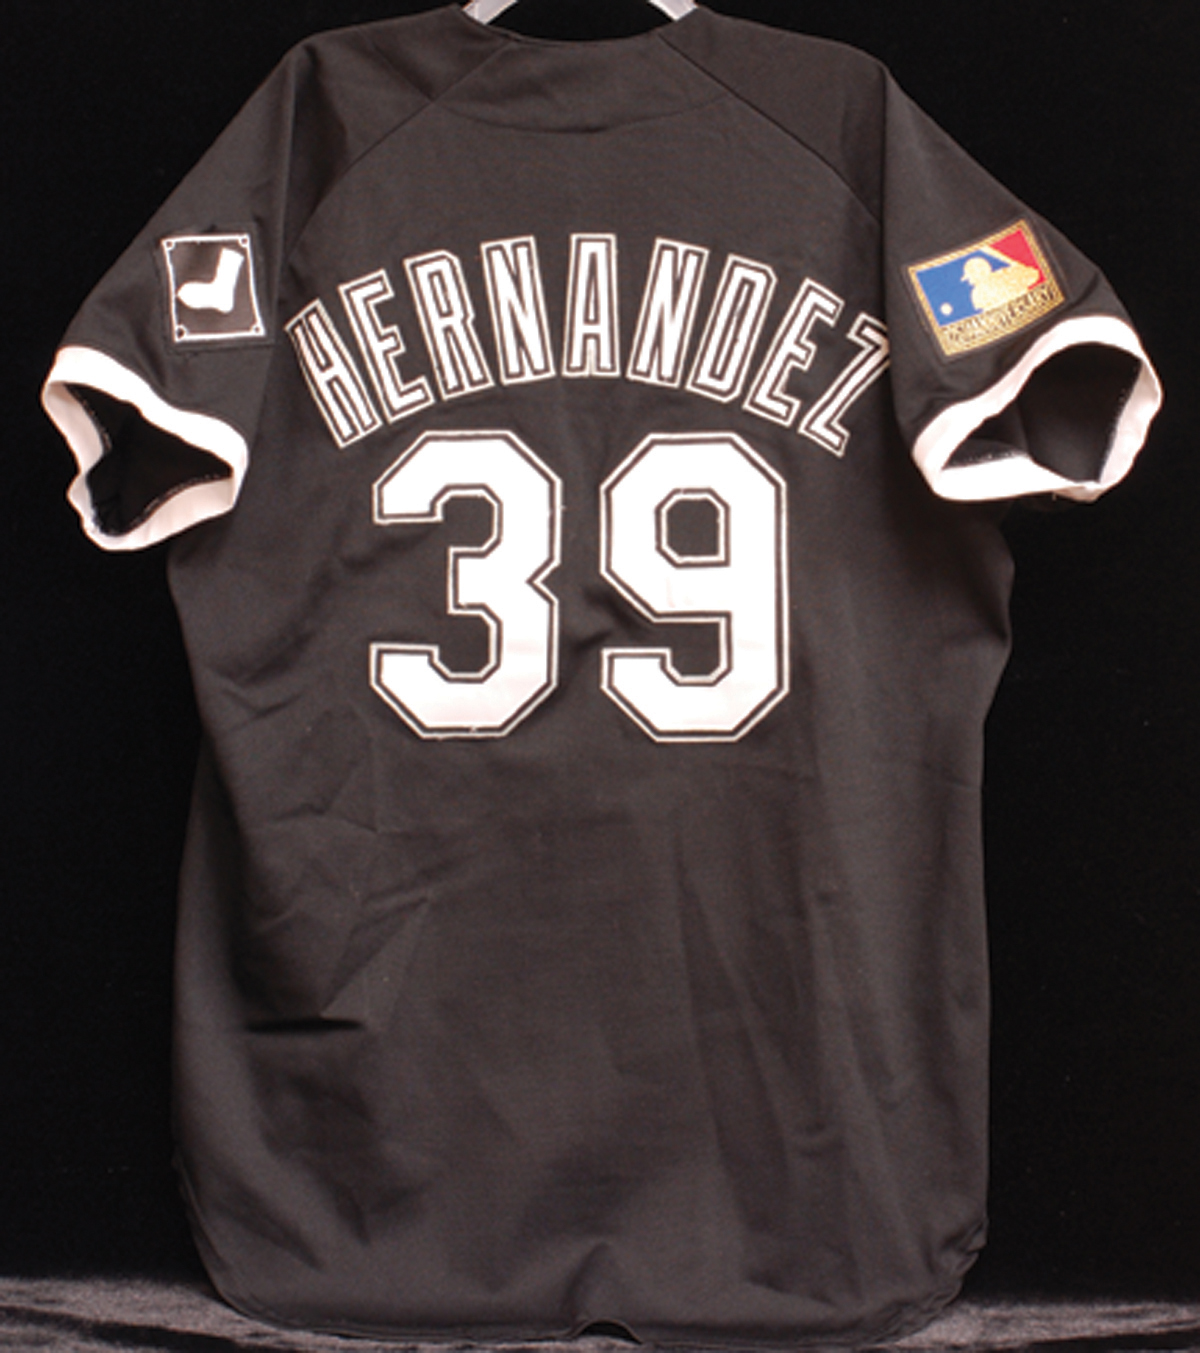 white sox game used jersey